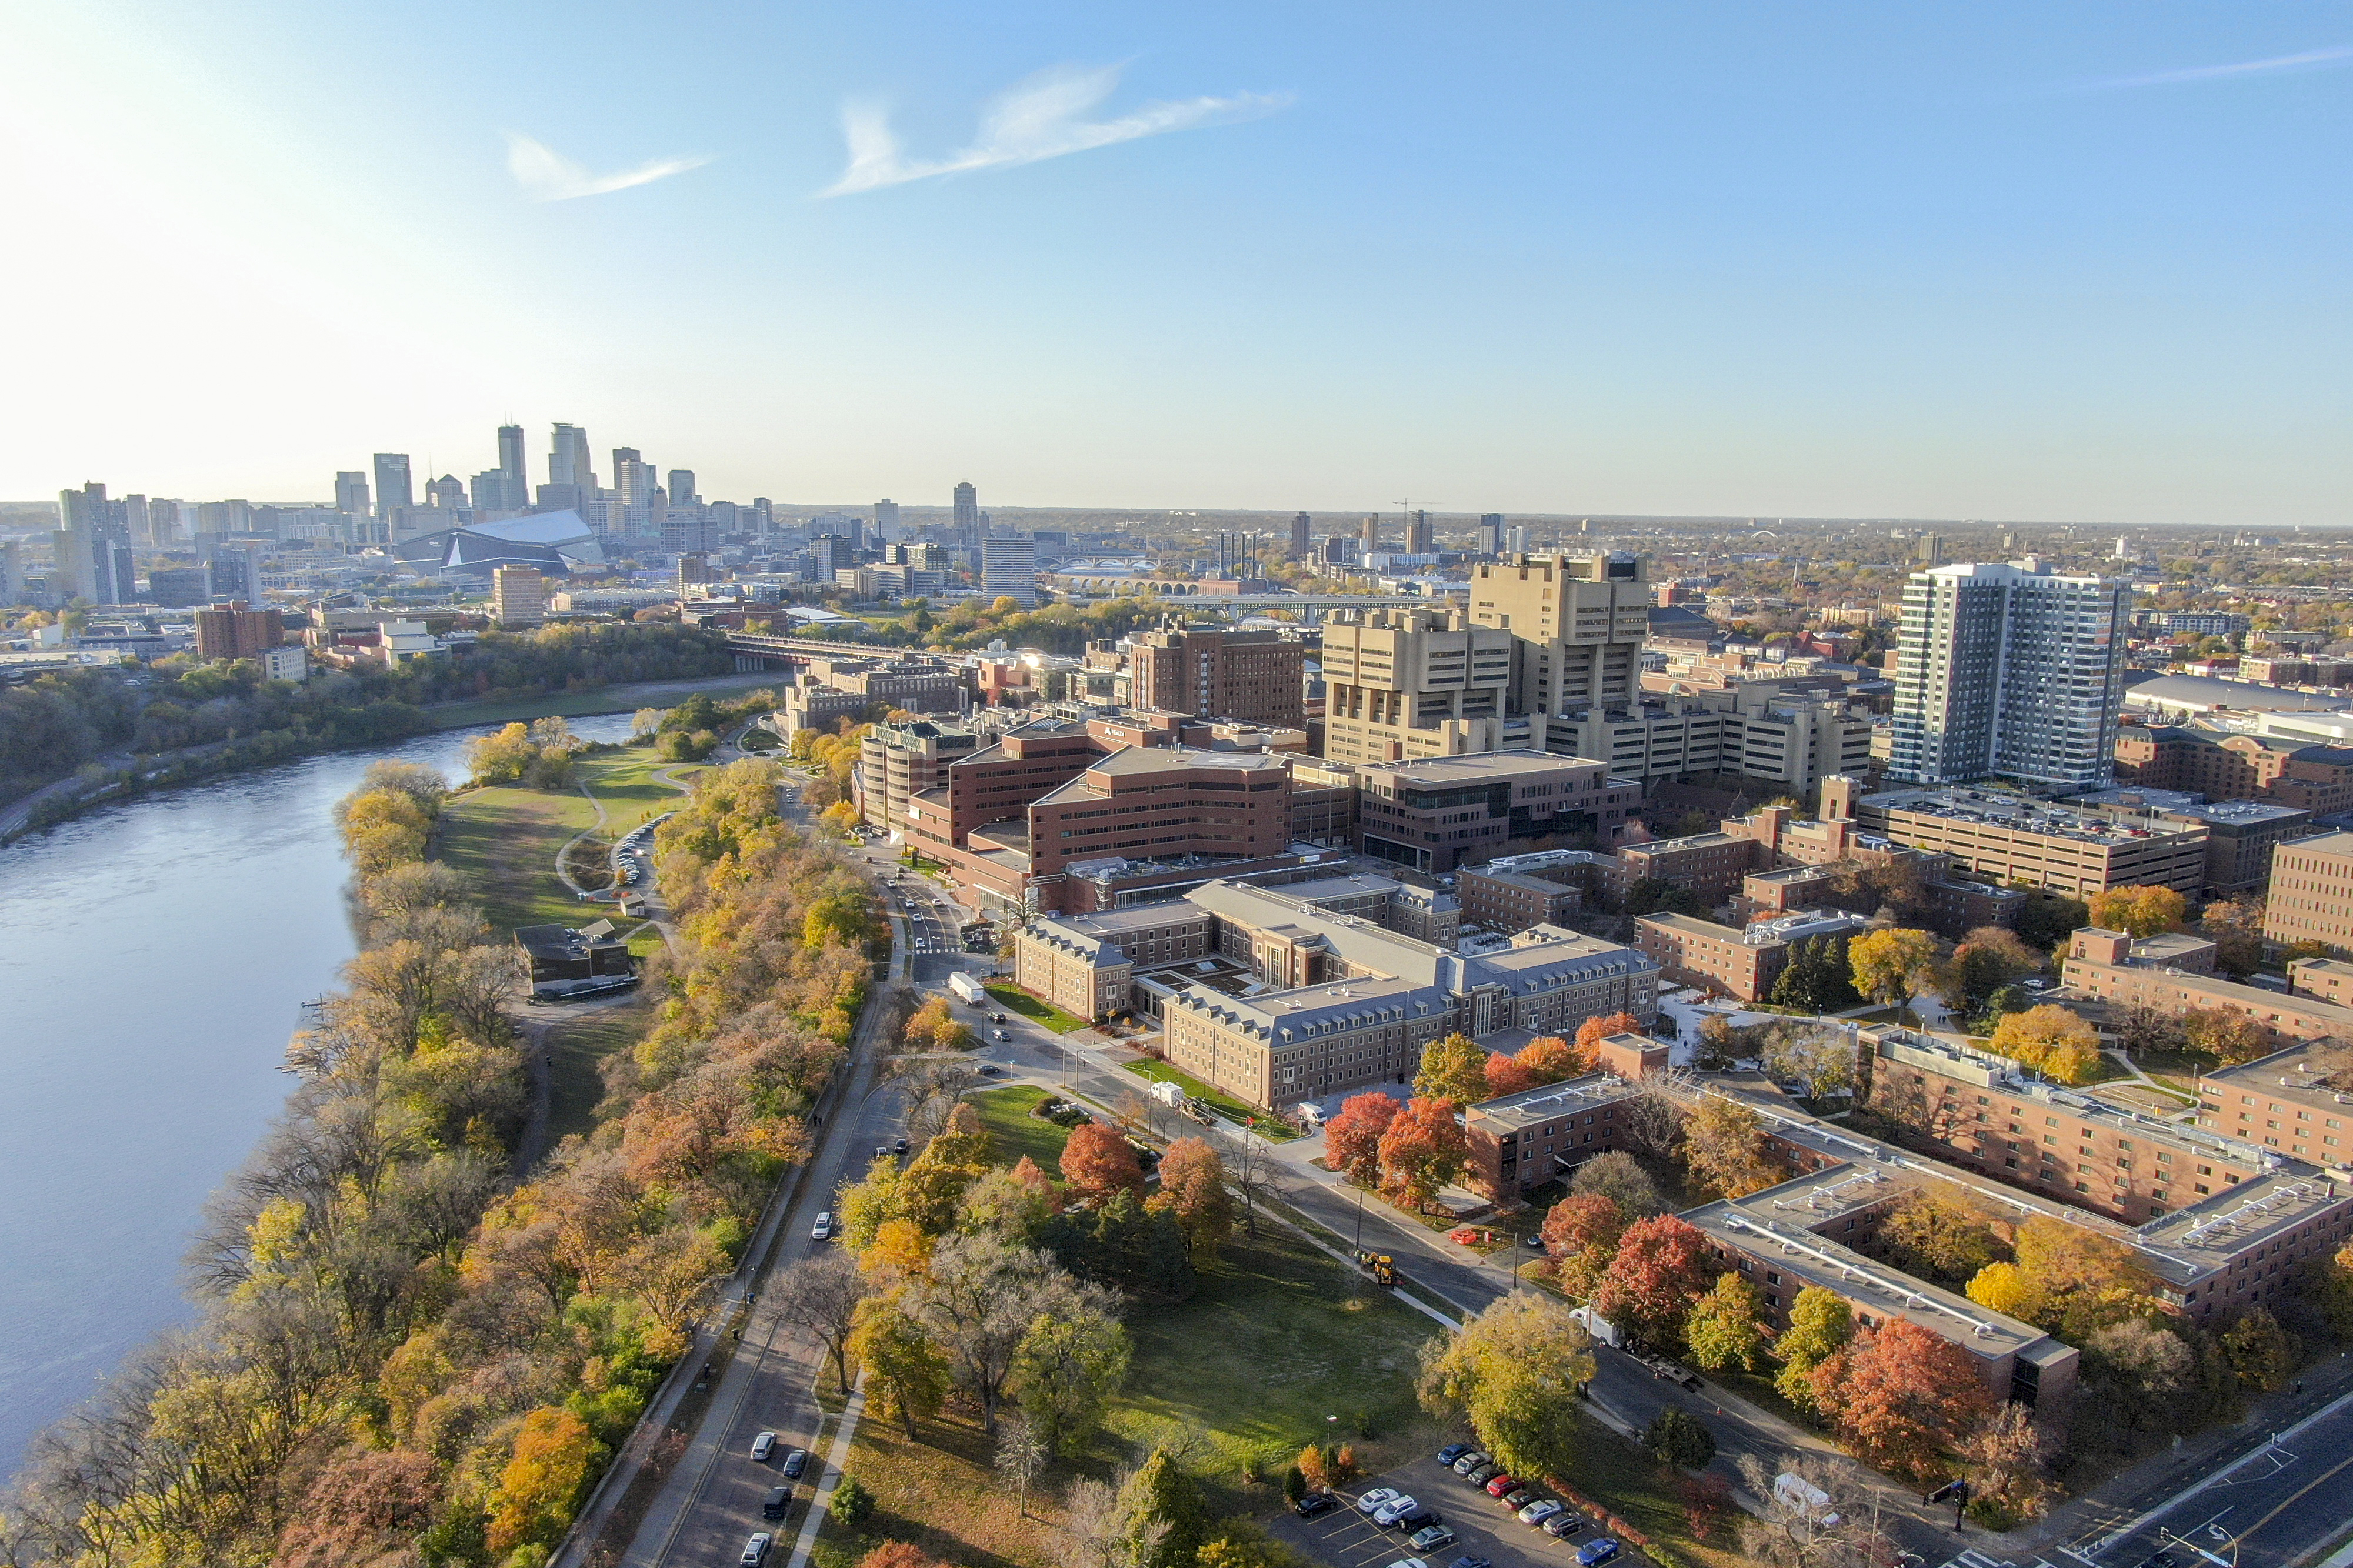 Birds-eye view of the UMN Twin Cities campus, with the Minneapolis skyline.